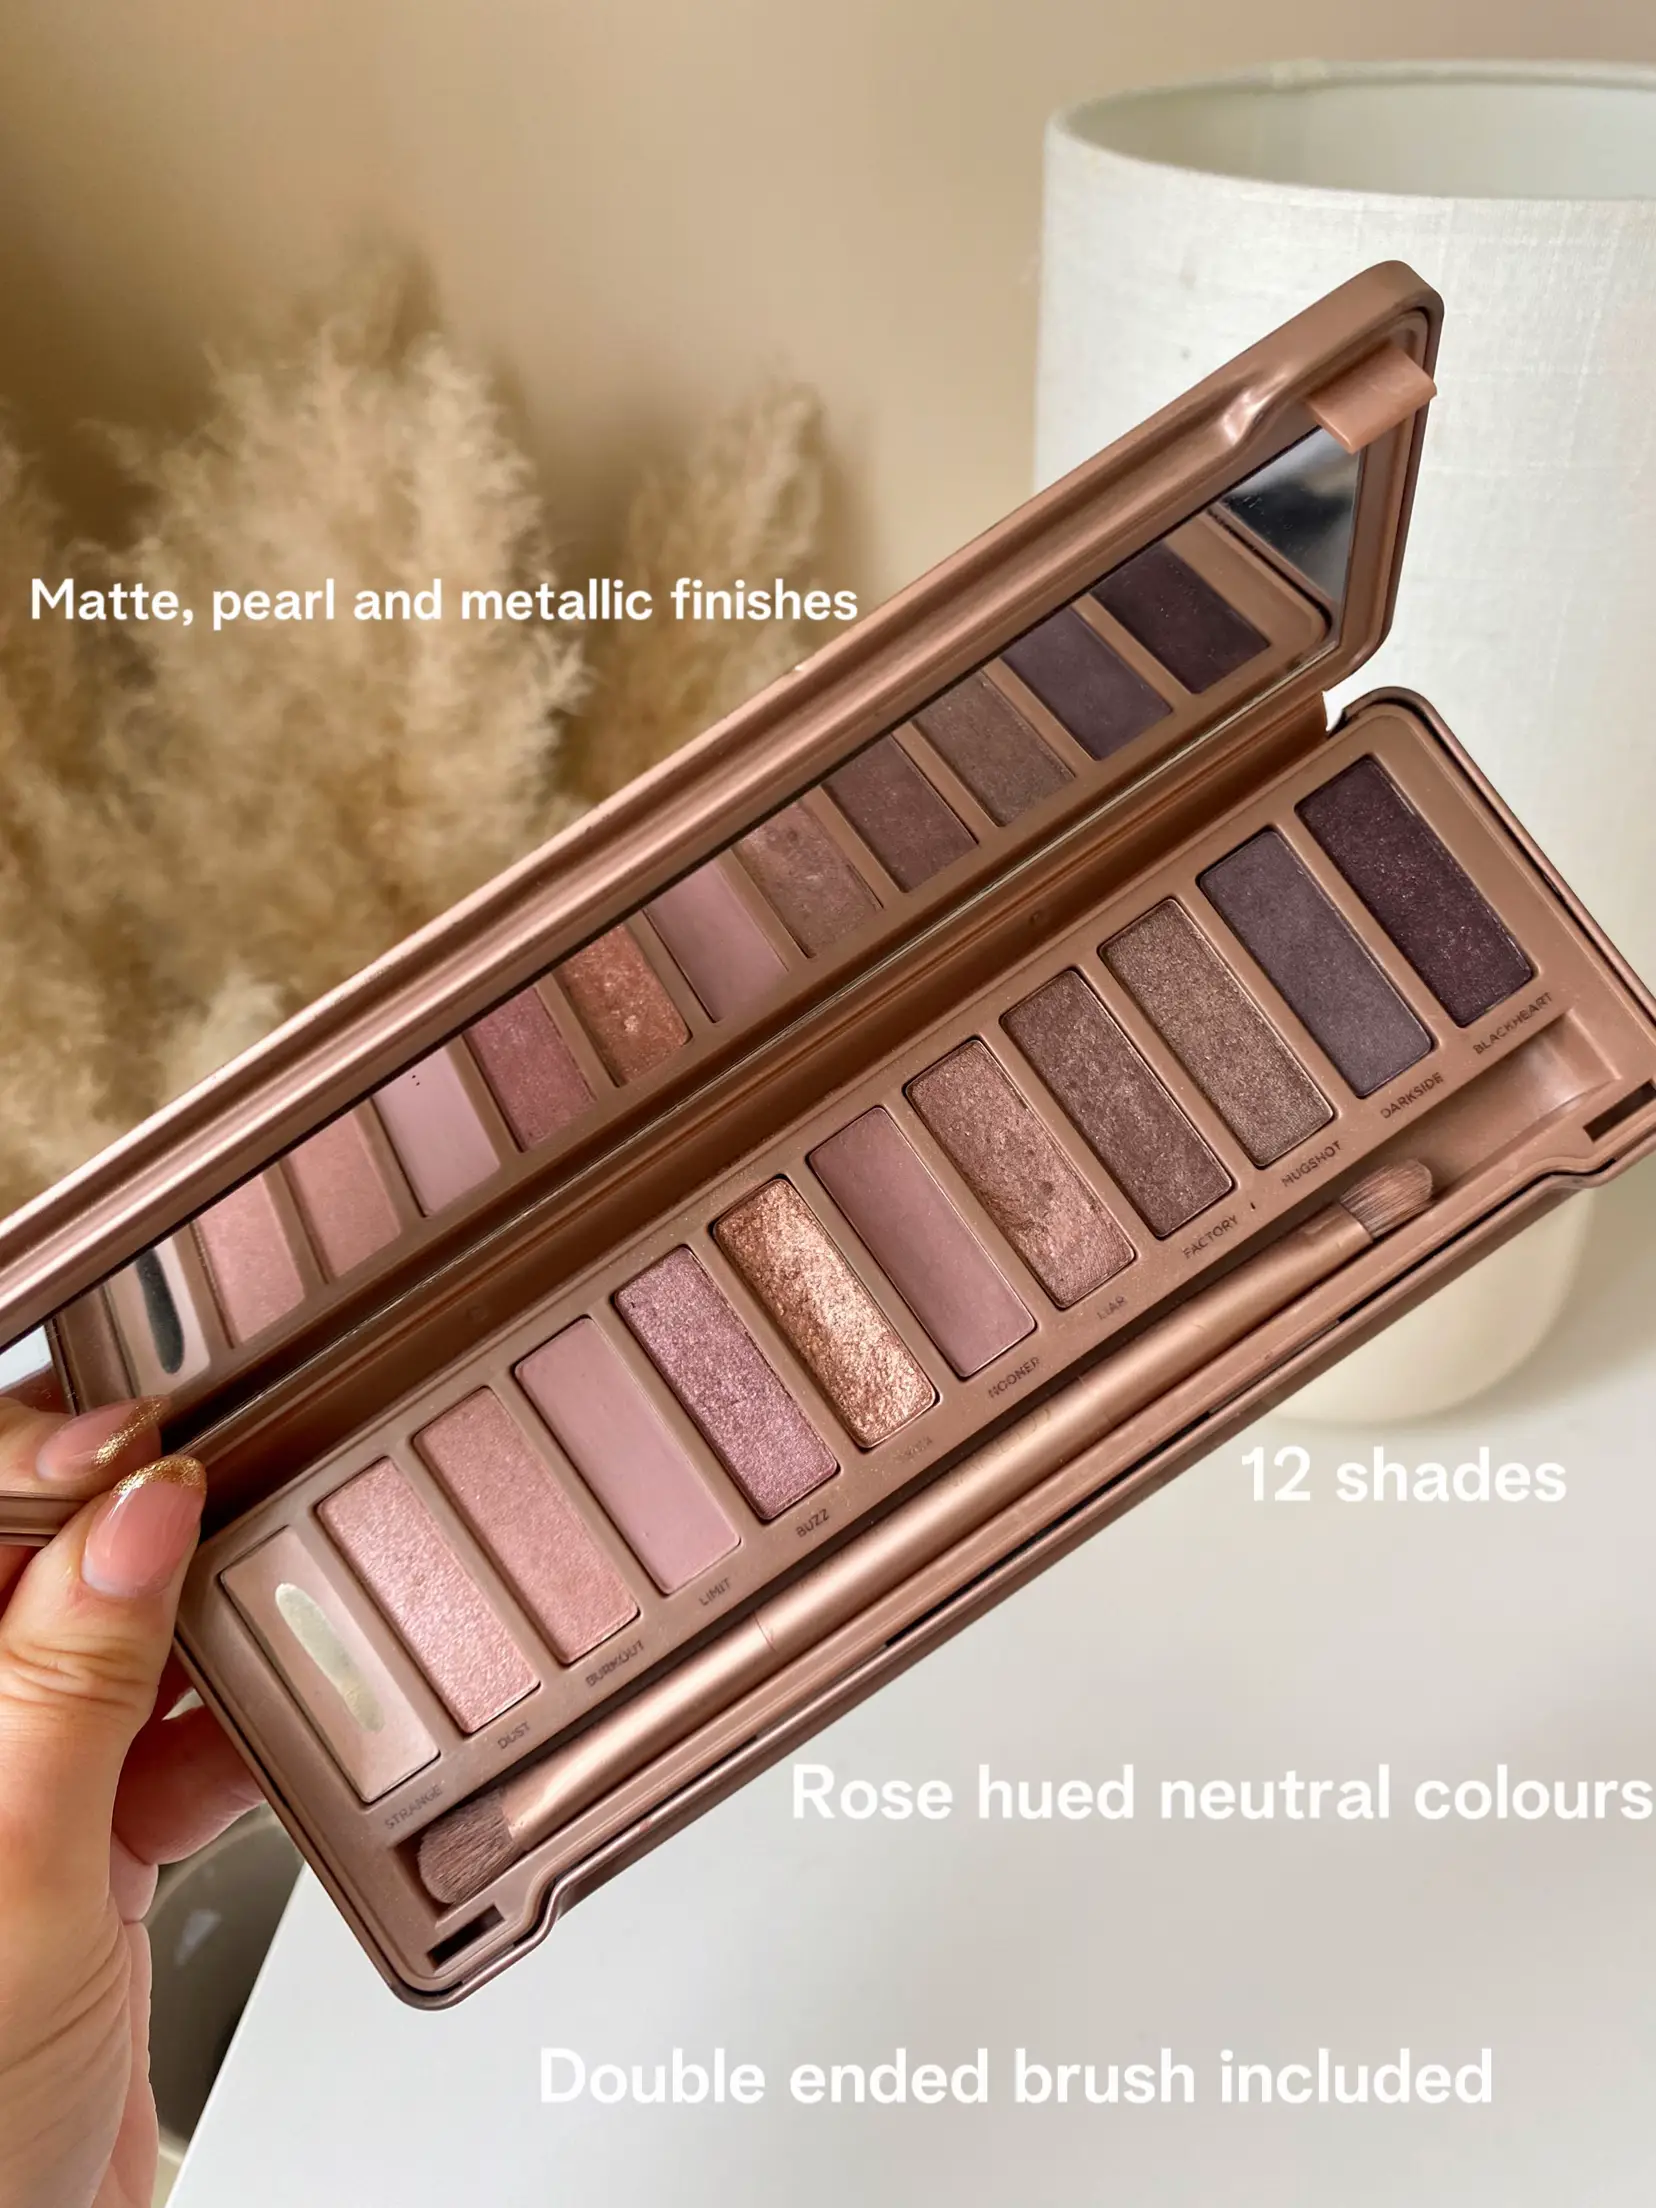 This Urban Decay product beats the Naked palettes hands down